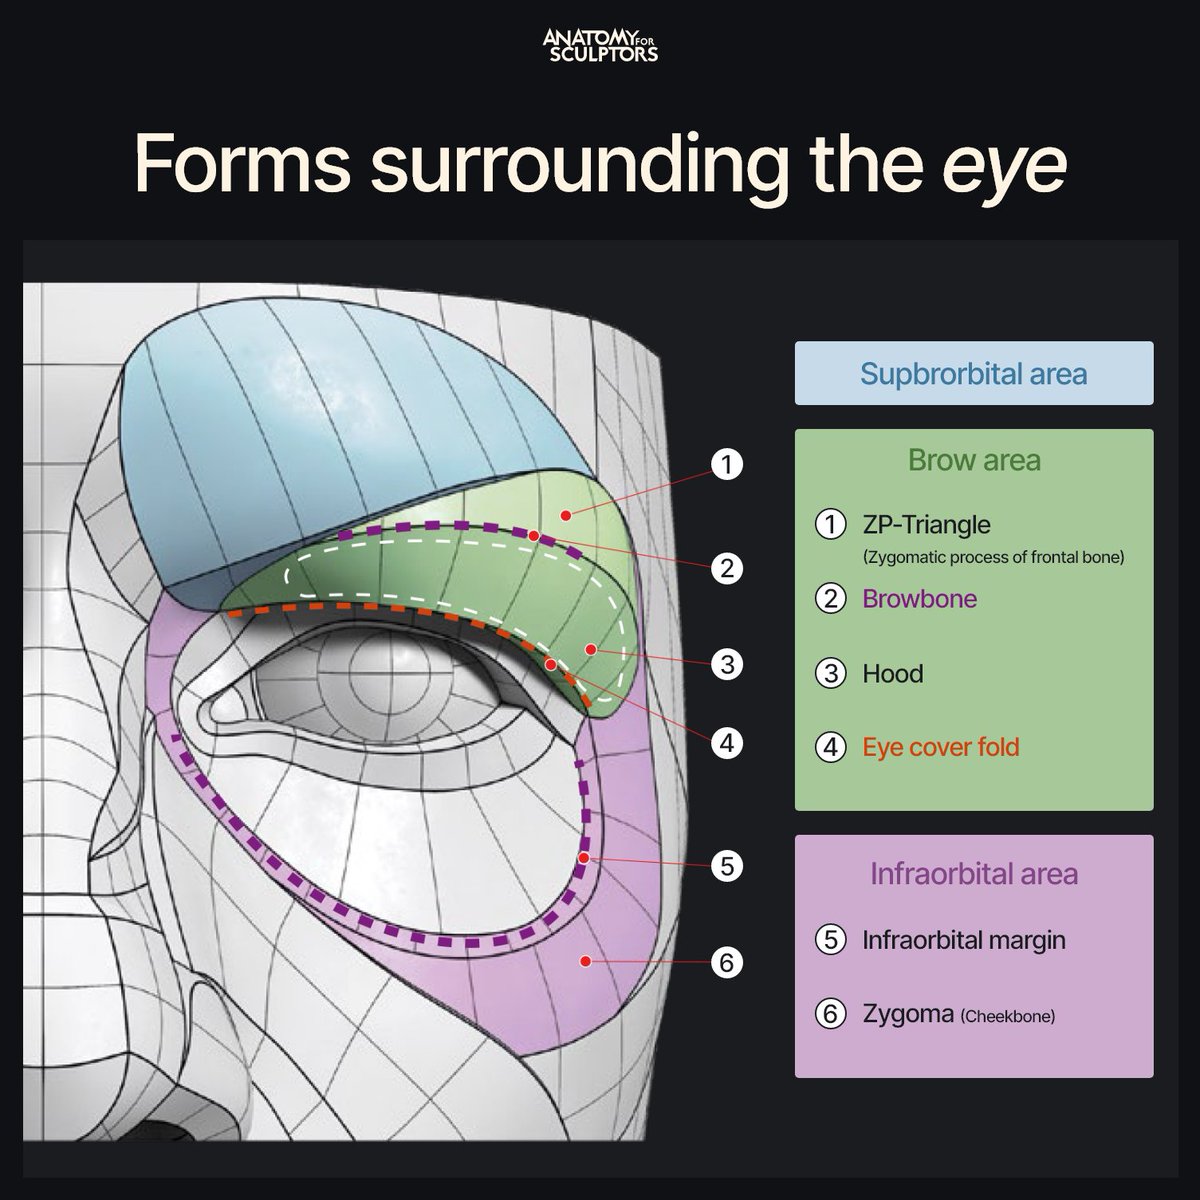 The forms surrounding the eye can be divided into three main areas: Supraorbital, Infraorbital, and Brow. Each can be further divided into the elements visible in the picture. This knowledge helps with creating realistic forms around the eye. #anatomy #3dmodeling #characterdesign